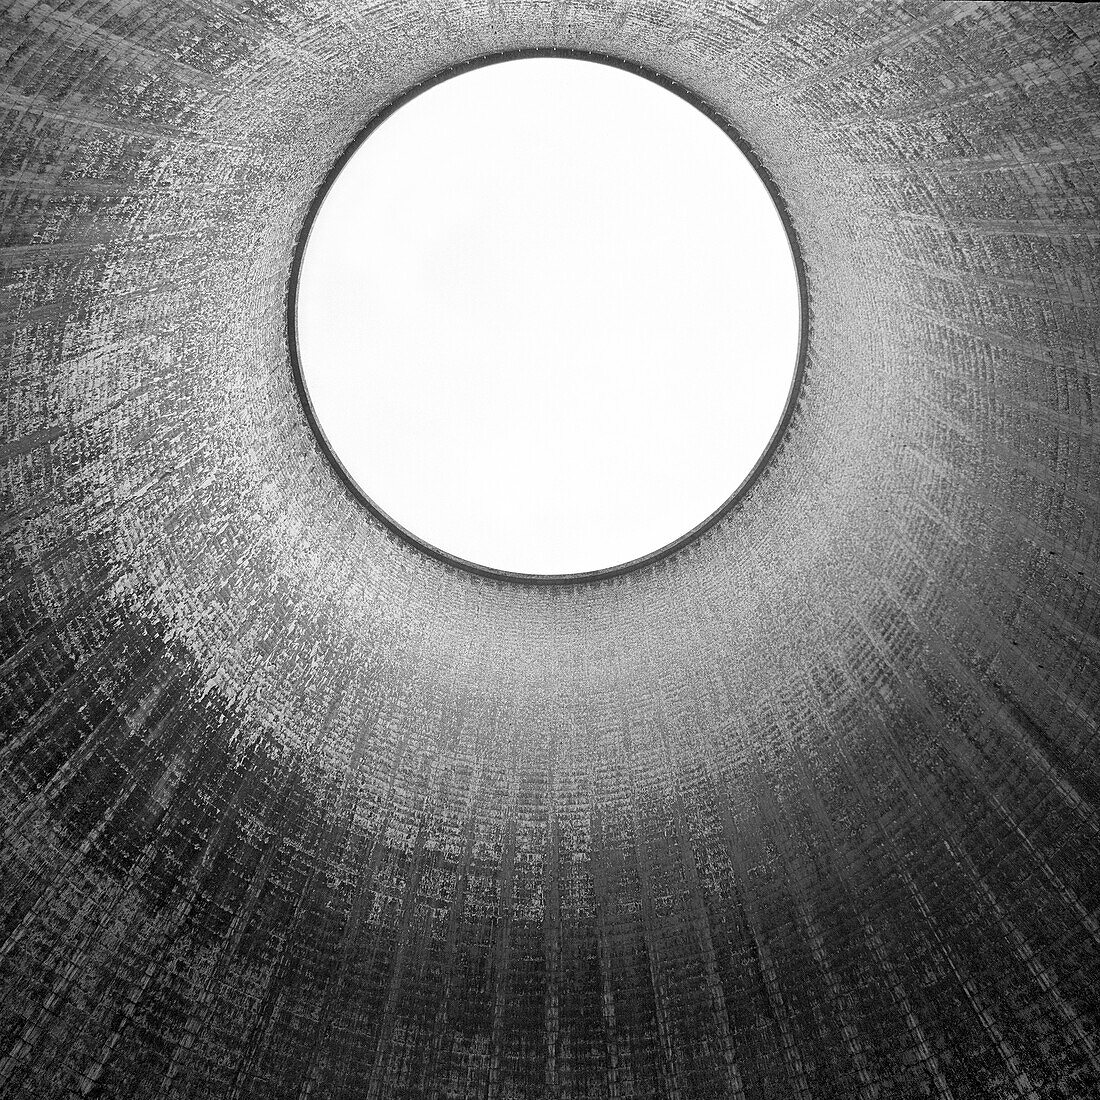 Inside of a new cooling tower